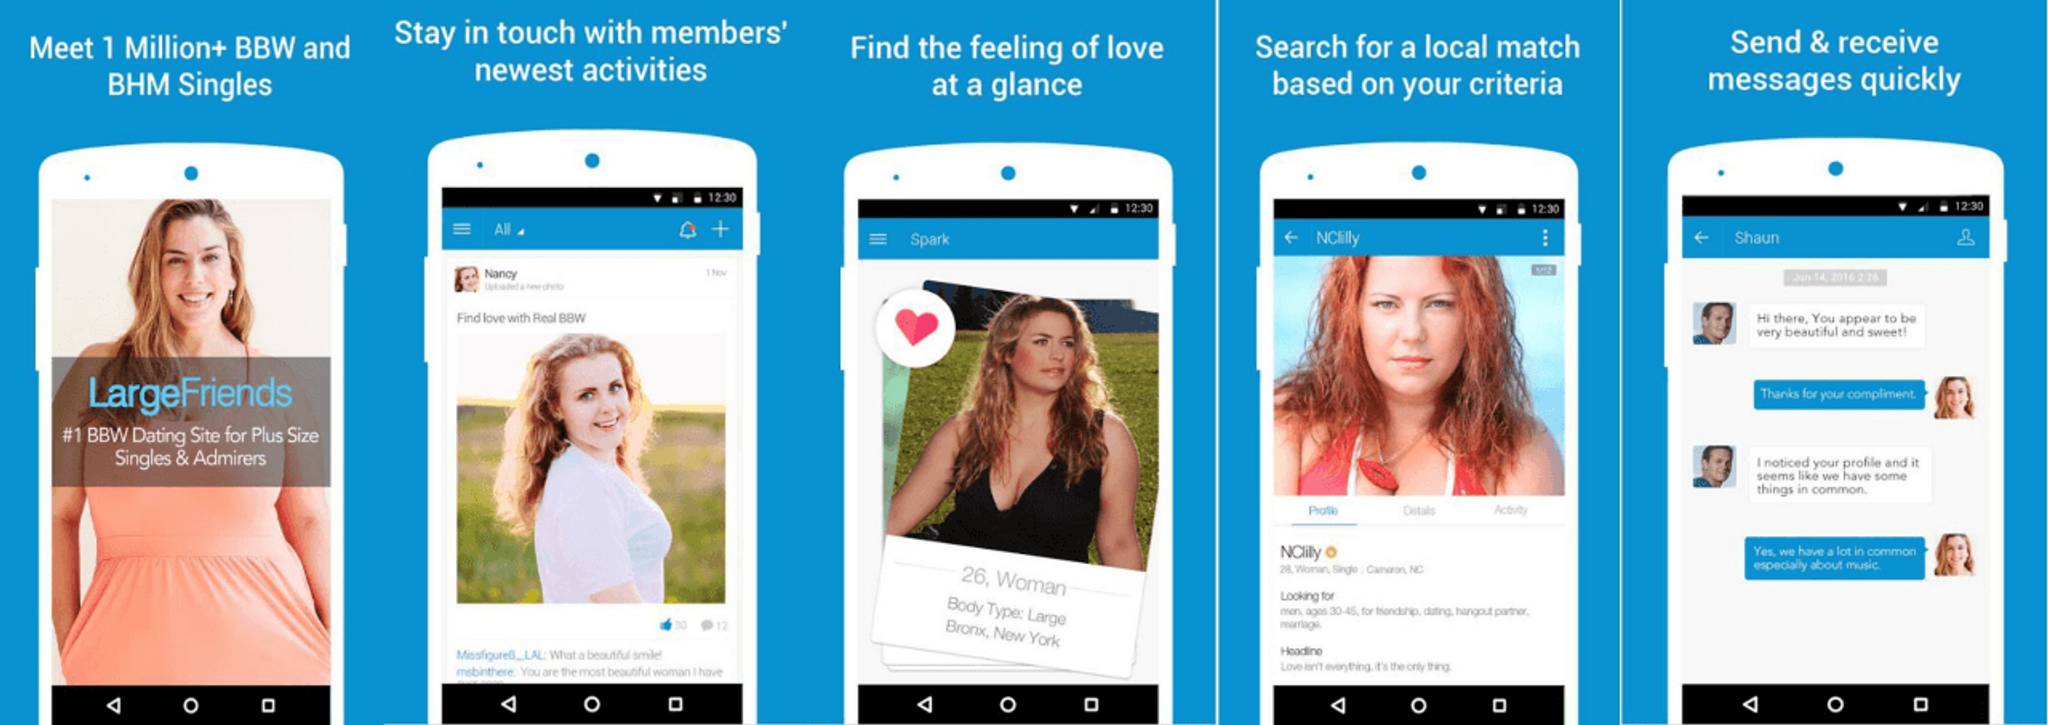 LargeFriends is another dating app, aimed specifically at plus-size singles. 